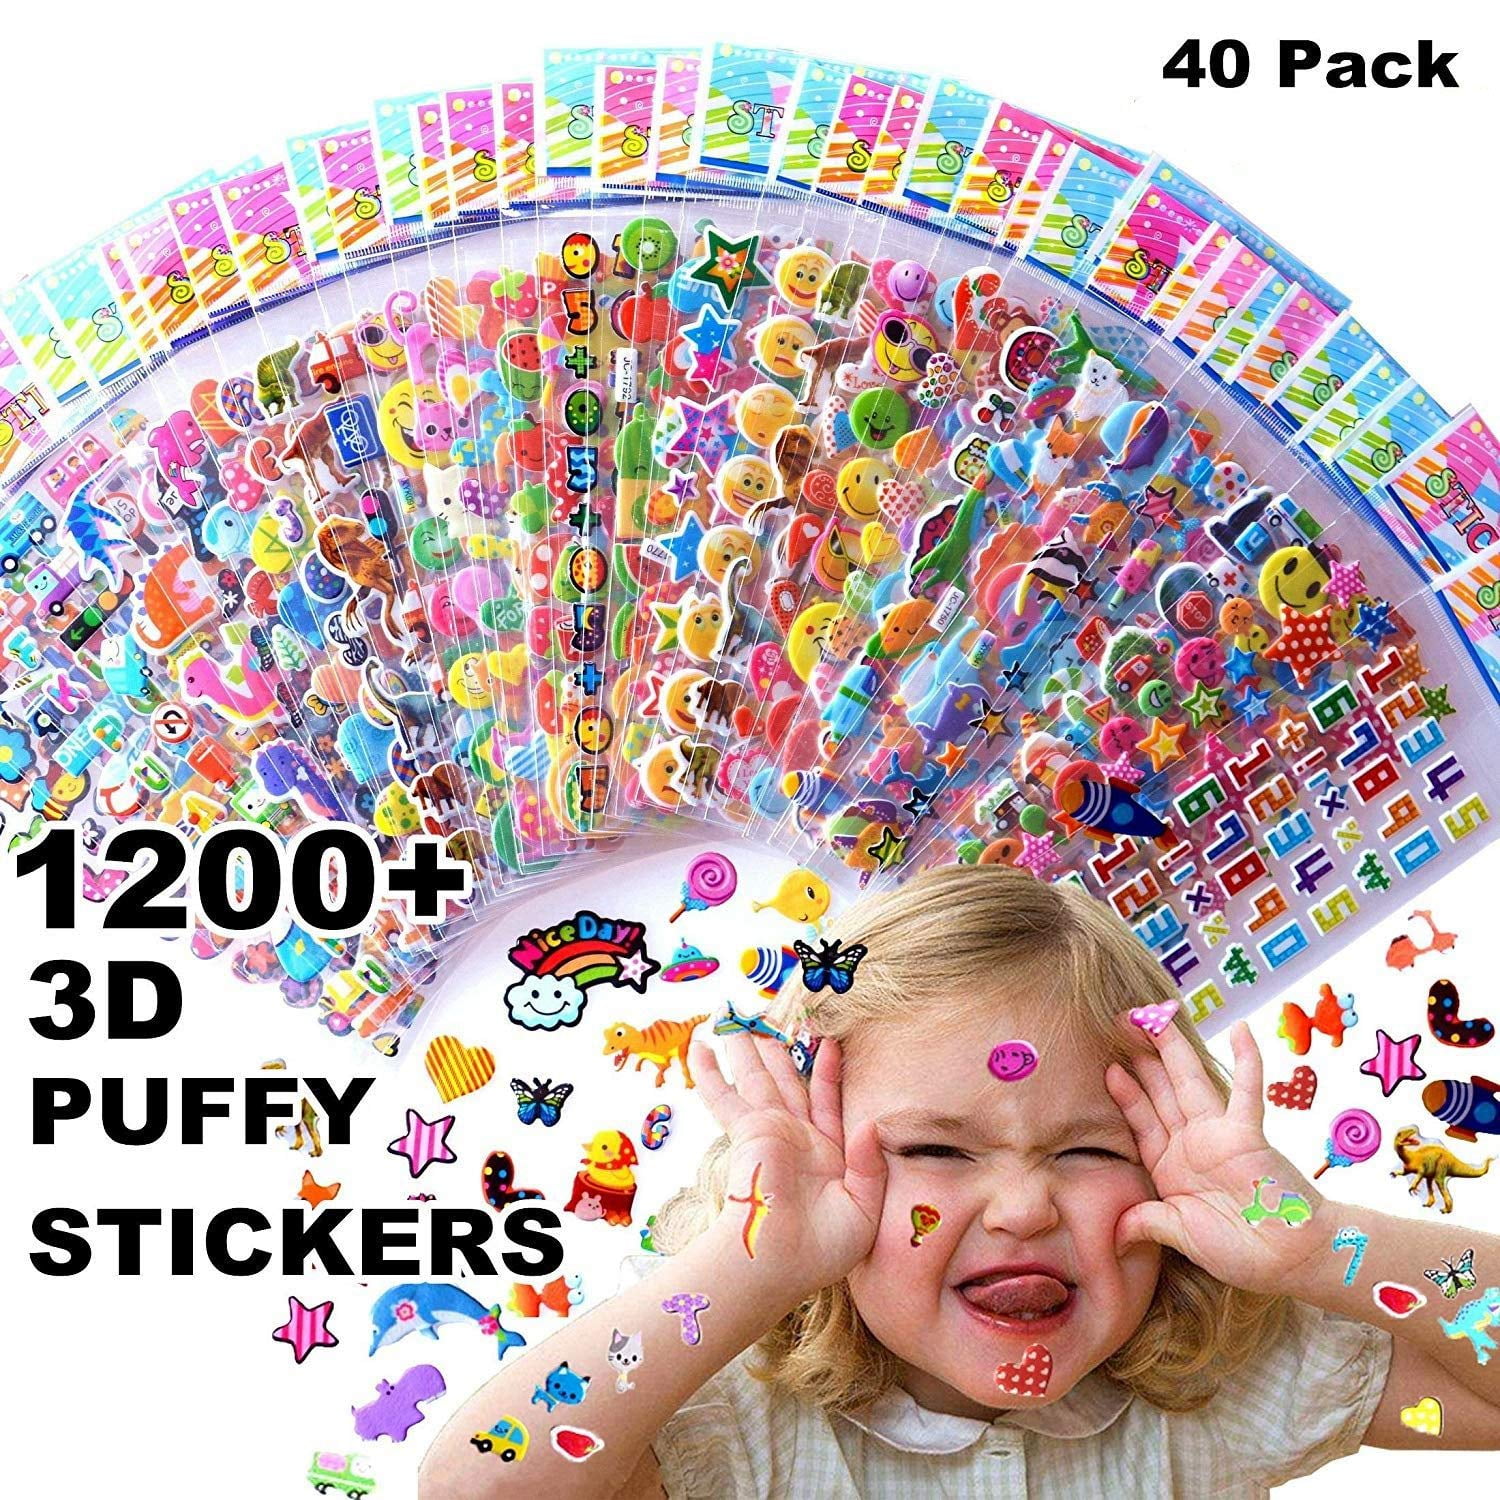 95 Cool and Cute 3D Puffy Stickers for Kids & Toddlers Cars,Stars,Animals... 